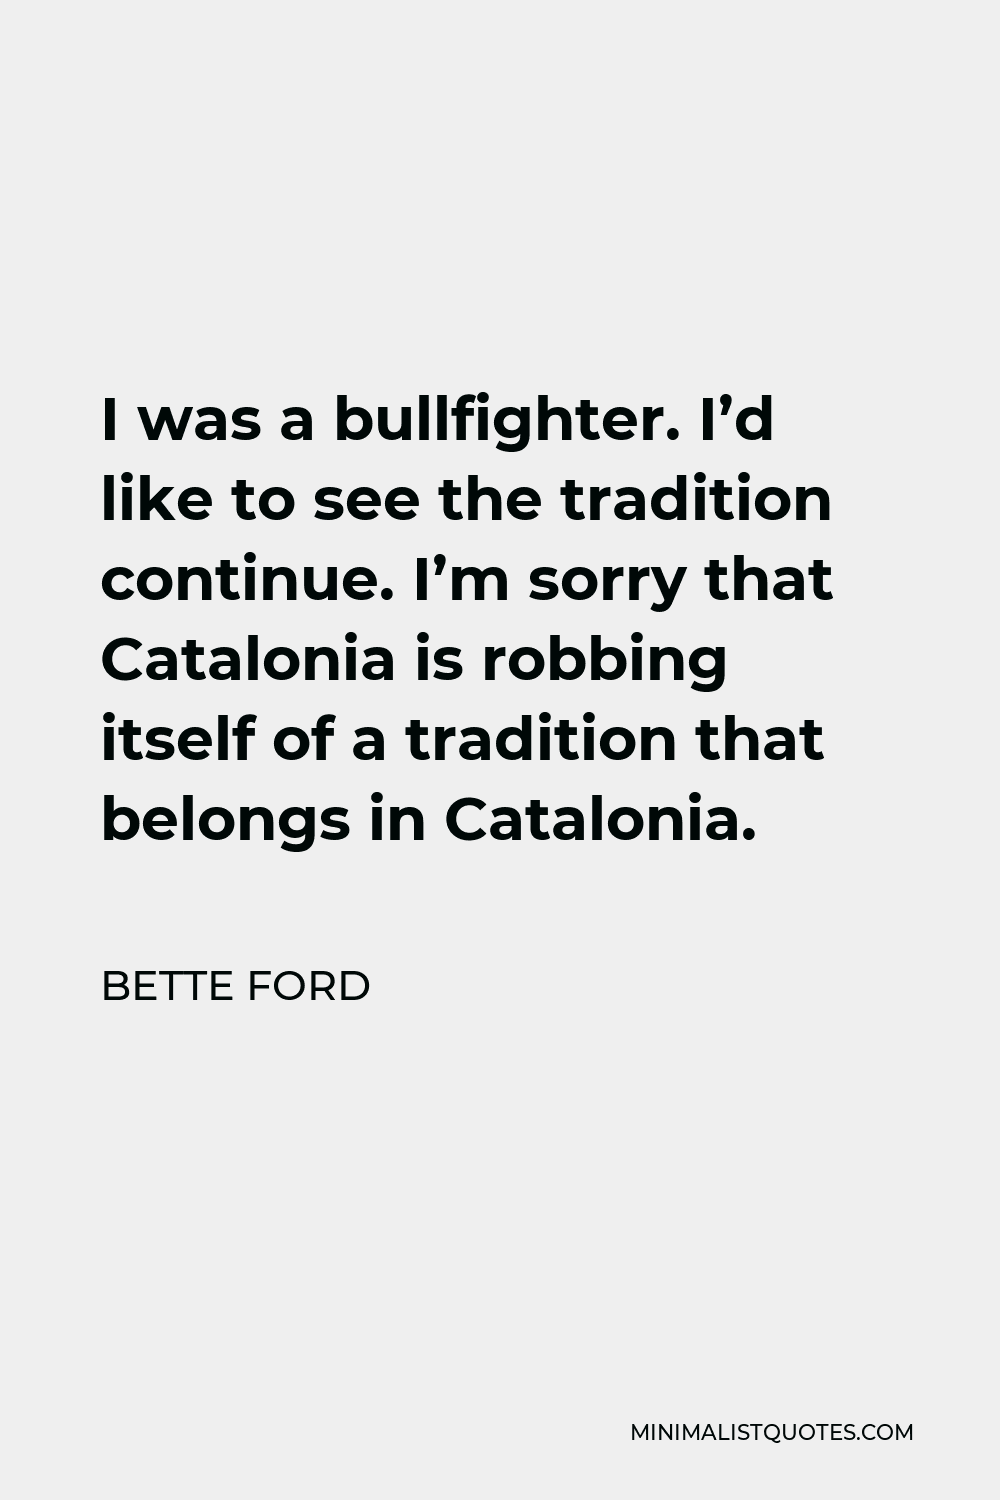 Bette Ford Quote - I was a bullfighter. I’d like to see the tradition continue. I’m sorry that Catalonia is robbing itself of a tradition that belongs in Catalonia.